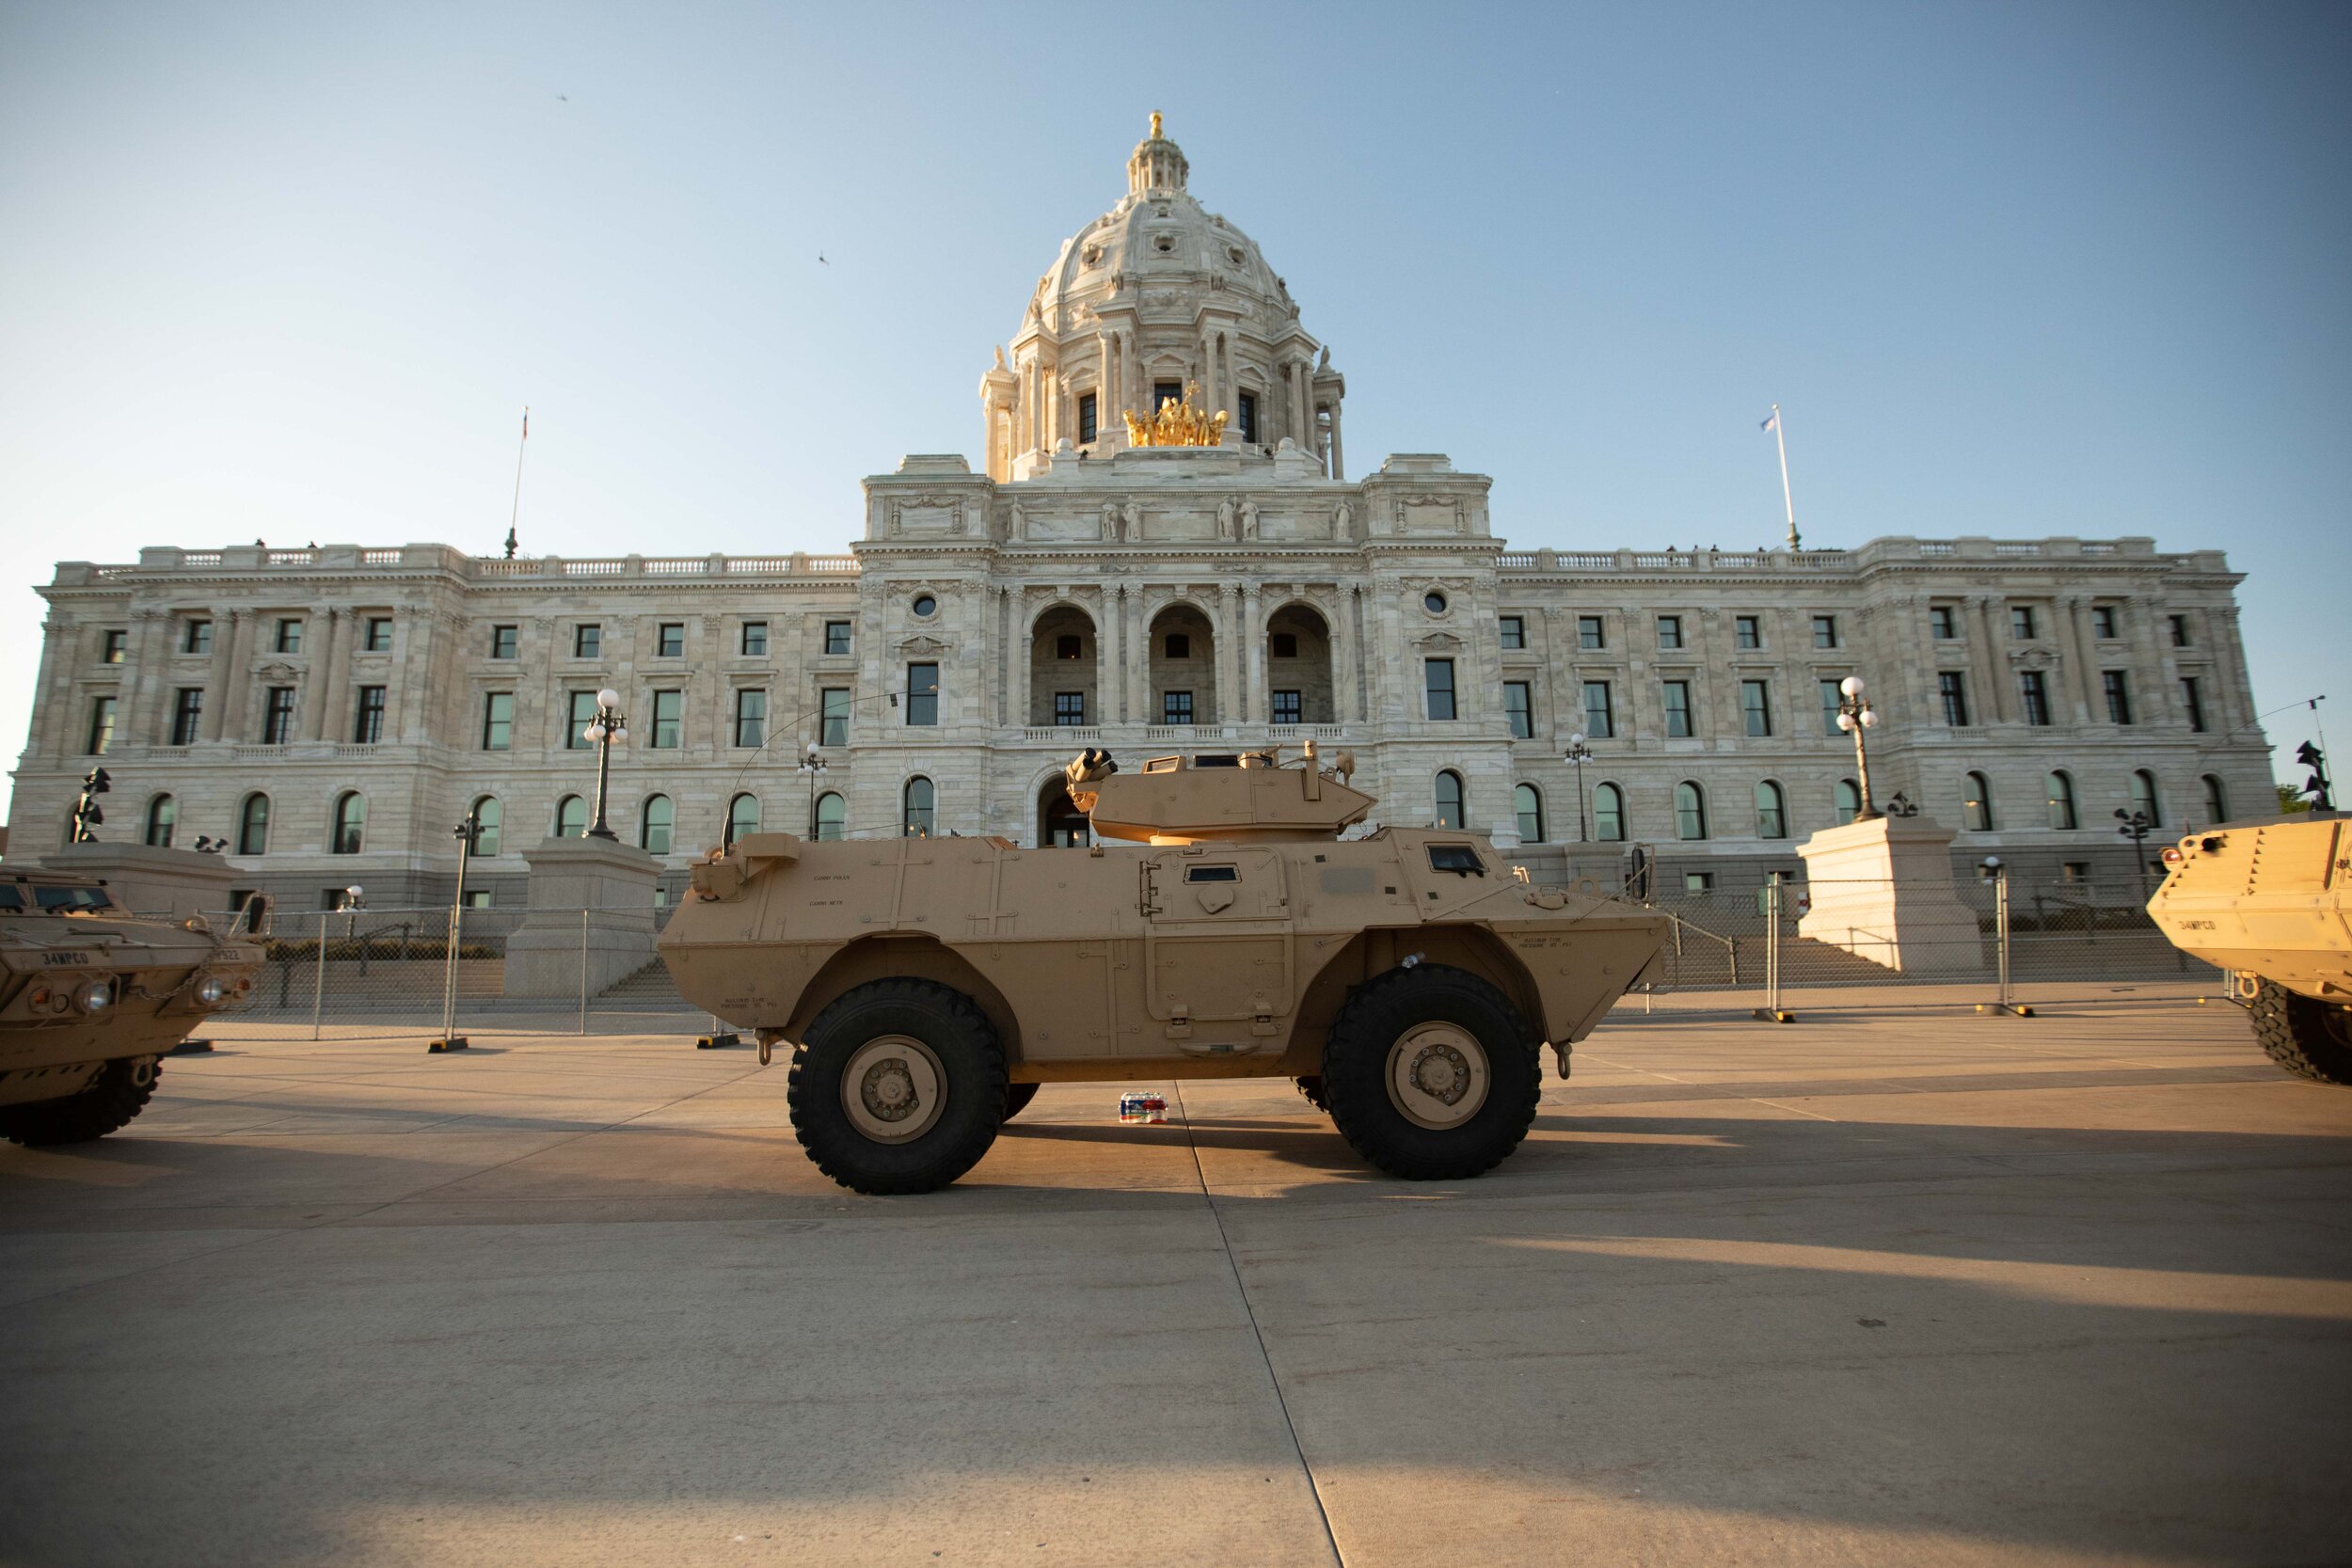  Armored vehicles sit in front of the State Capitol building in Saint Paul, Minnesota on June 1, 2020. Chris Juhn/Zenger 